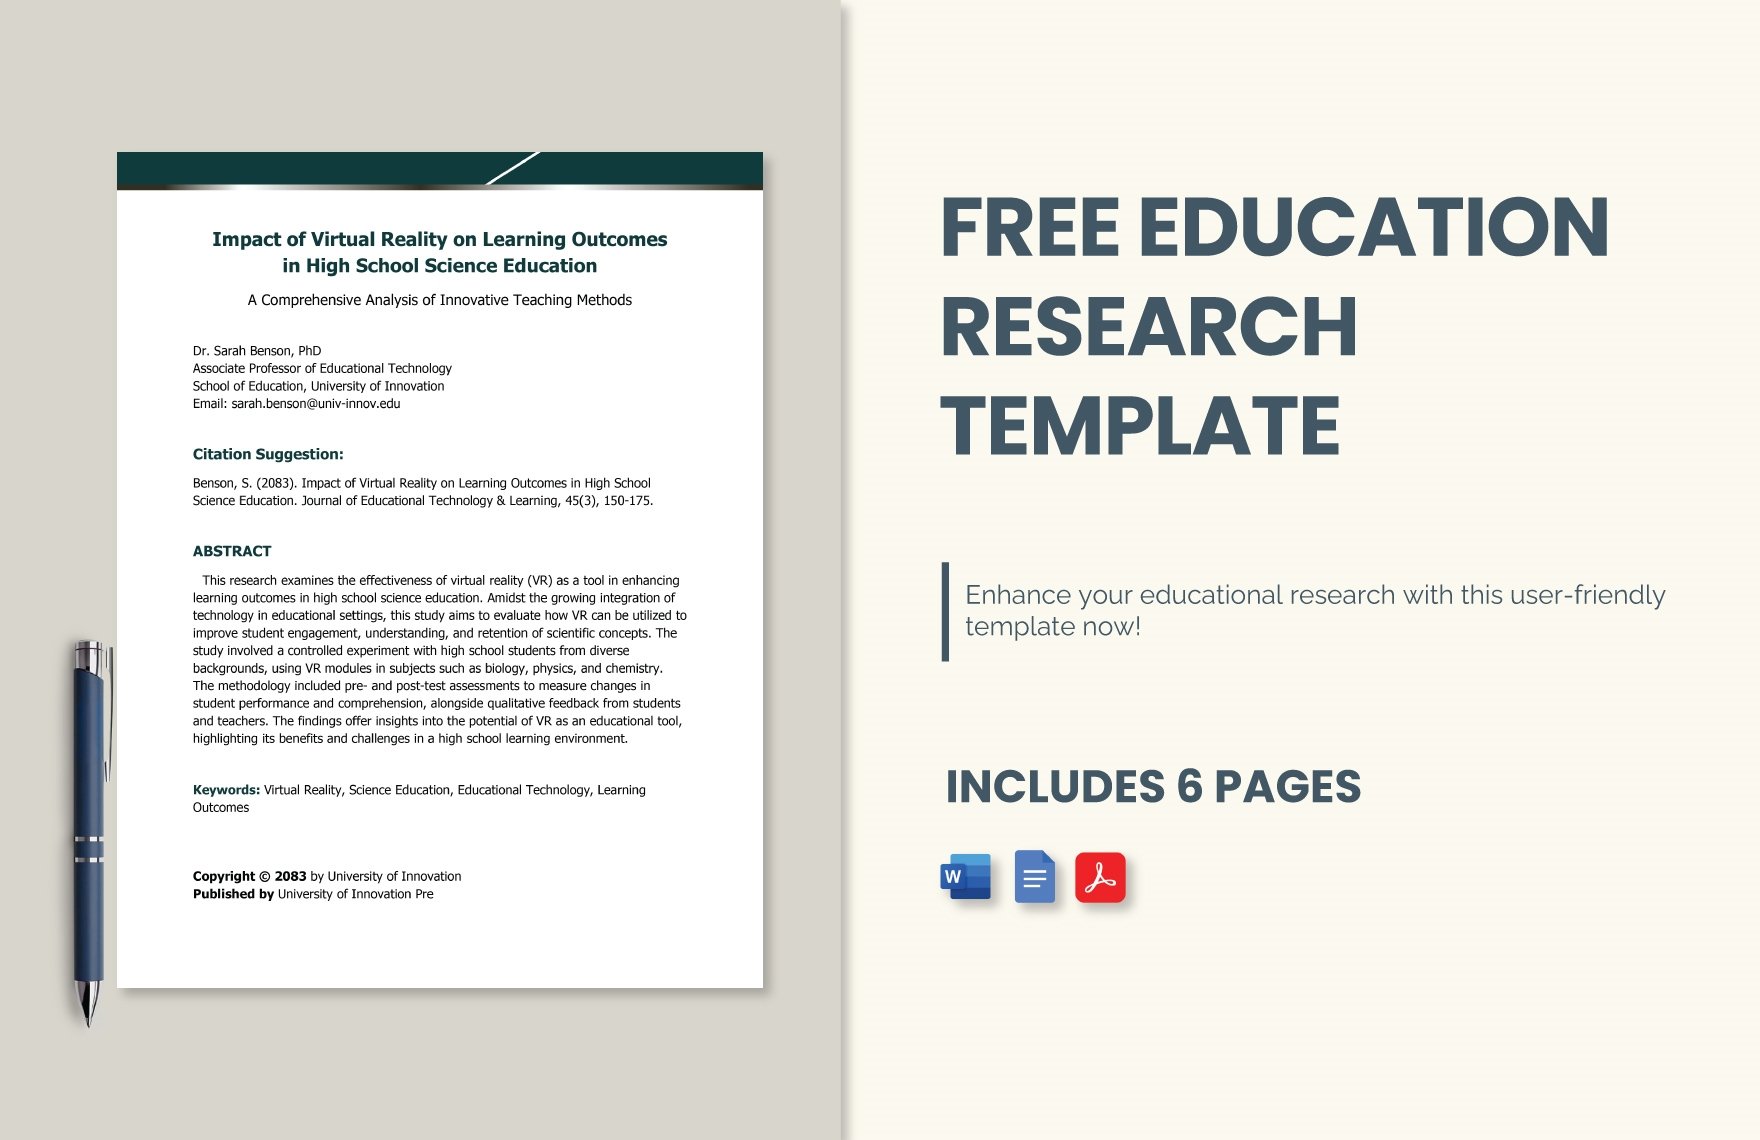 Education Research Template